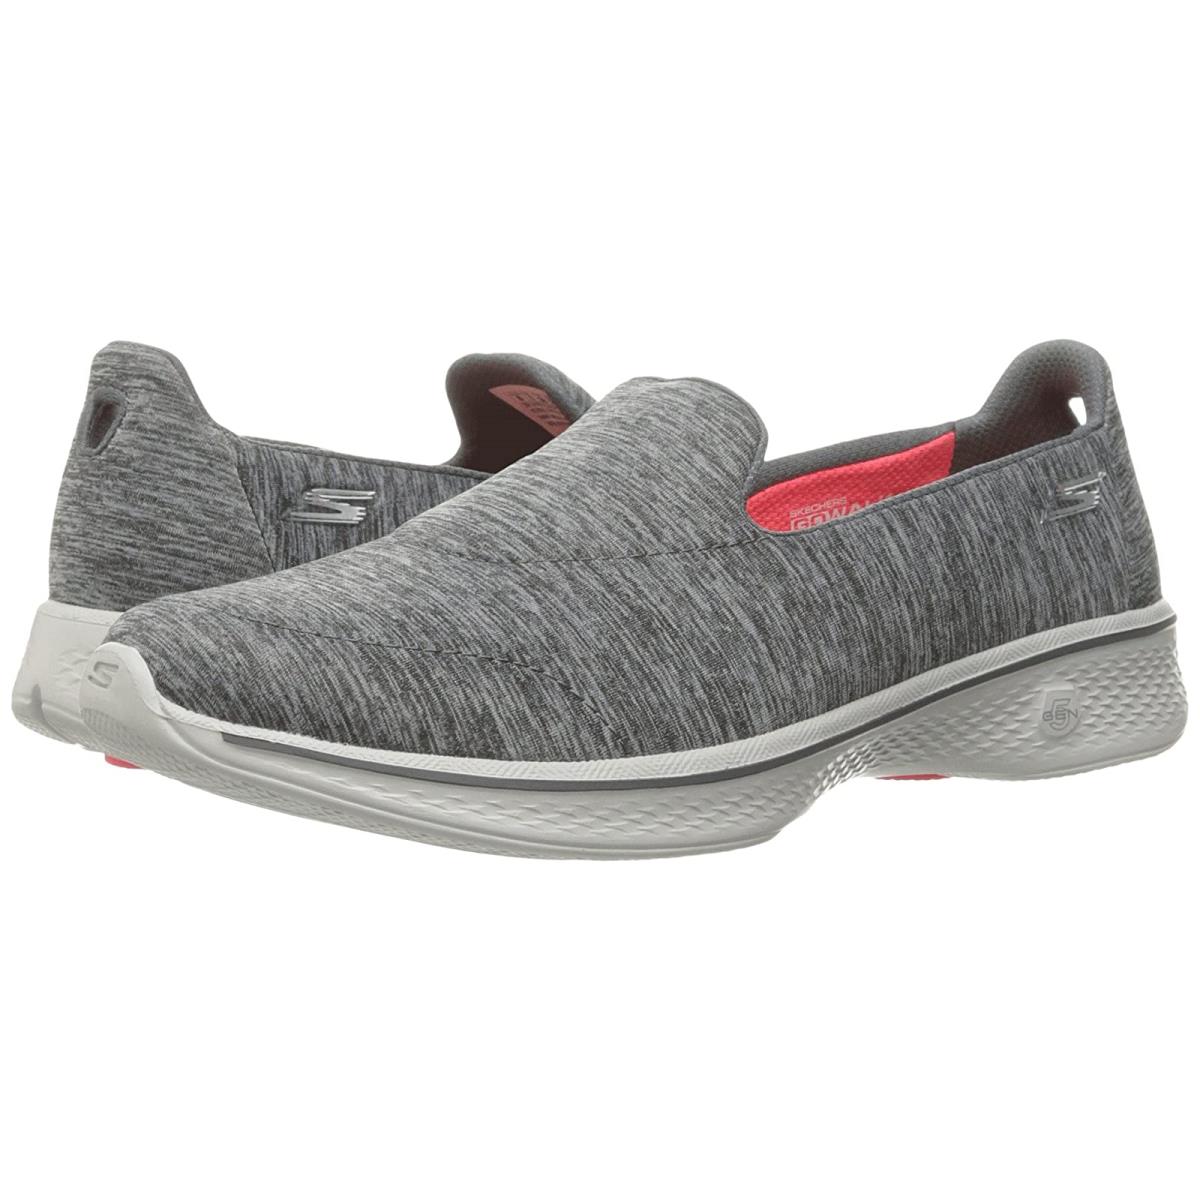 Woman`s Sneakers Athletic Shoes Skechers Performance Go Walk 4 - Achiever Gray